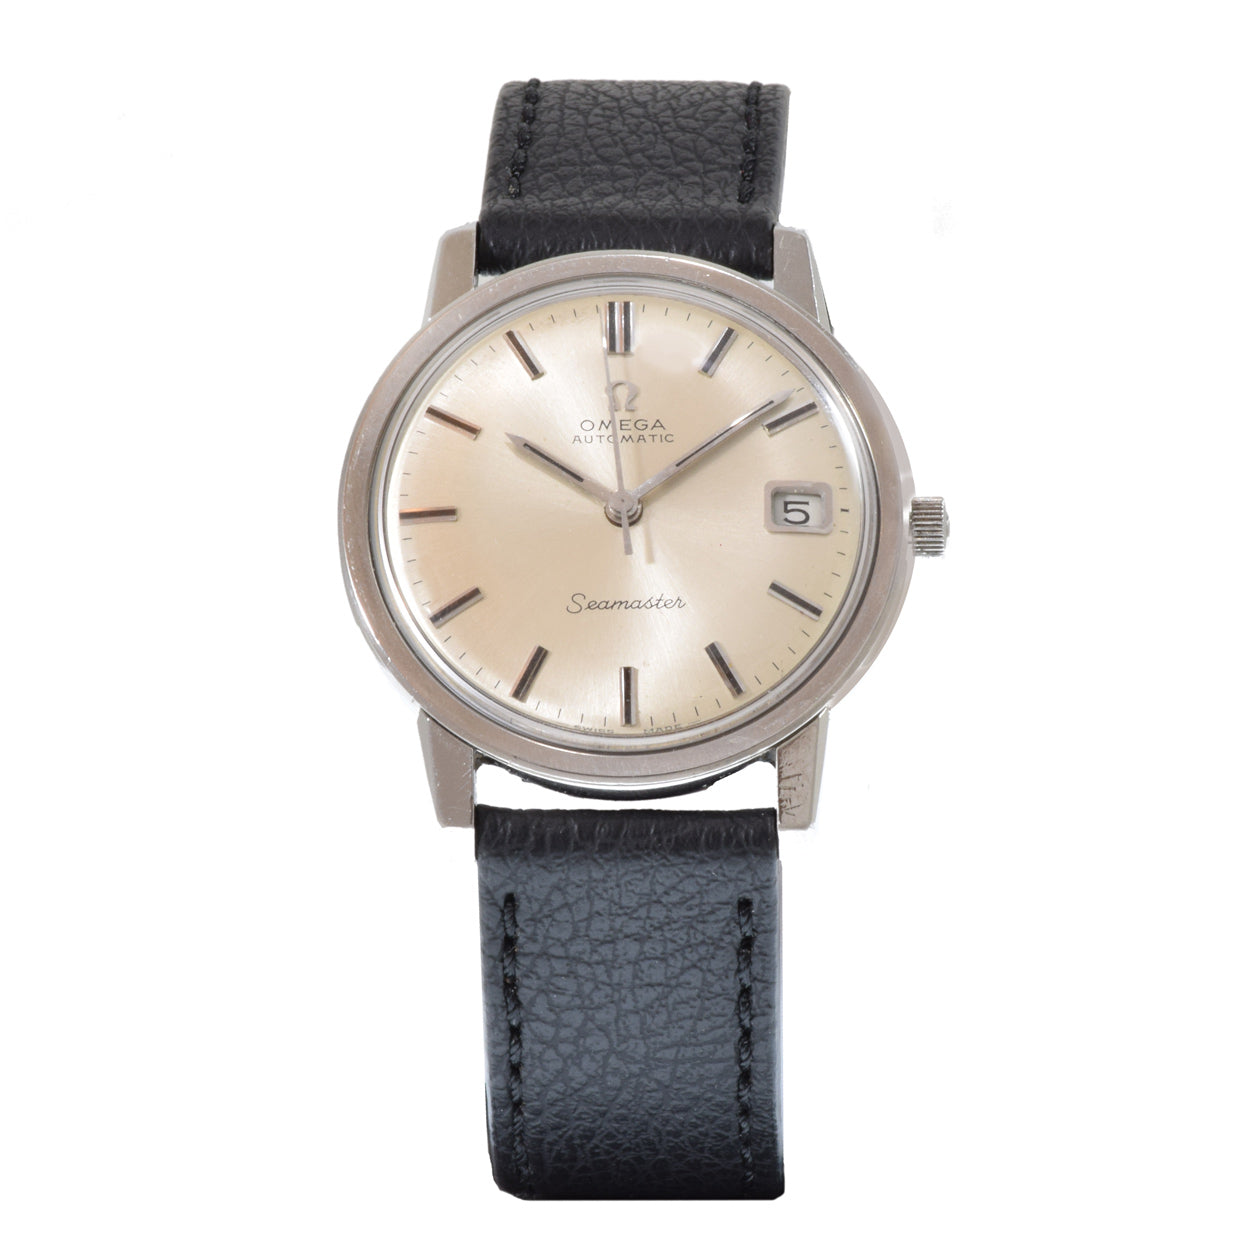 Vintage Omega Seamaster 1960's Automatic Watch